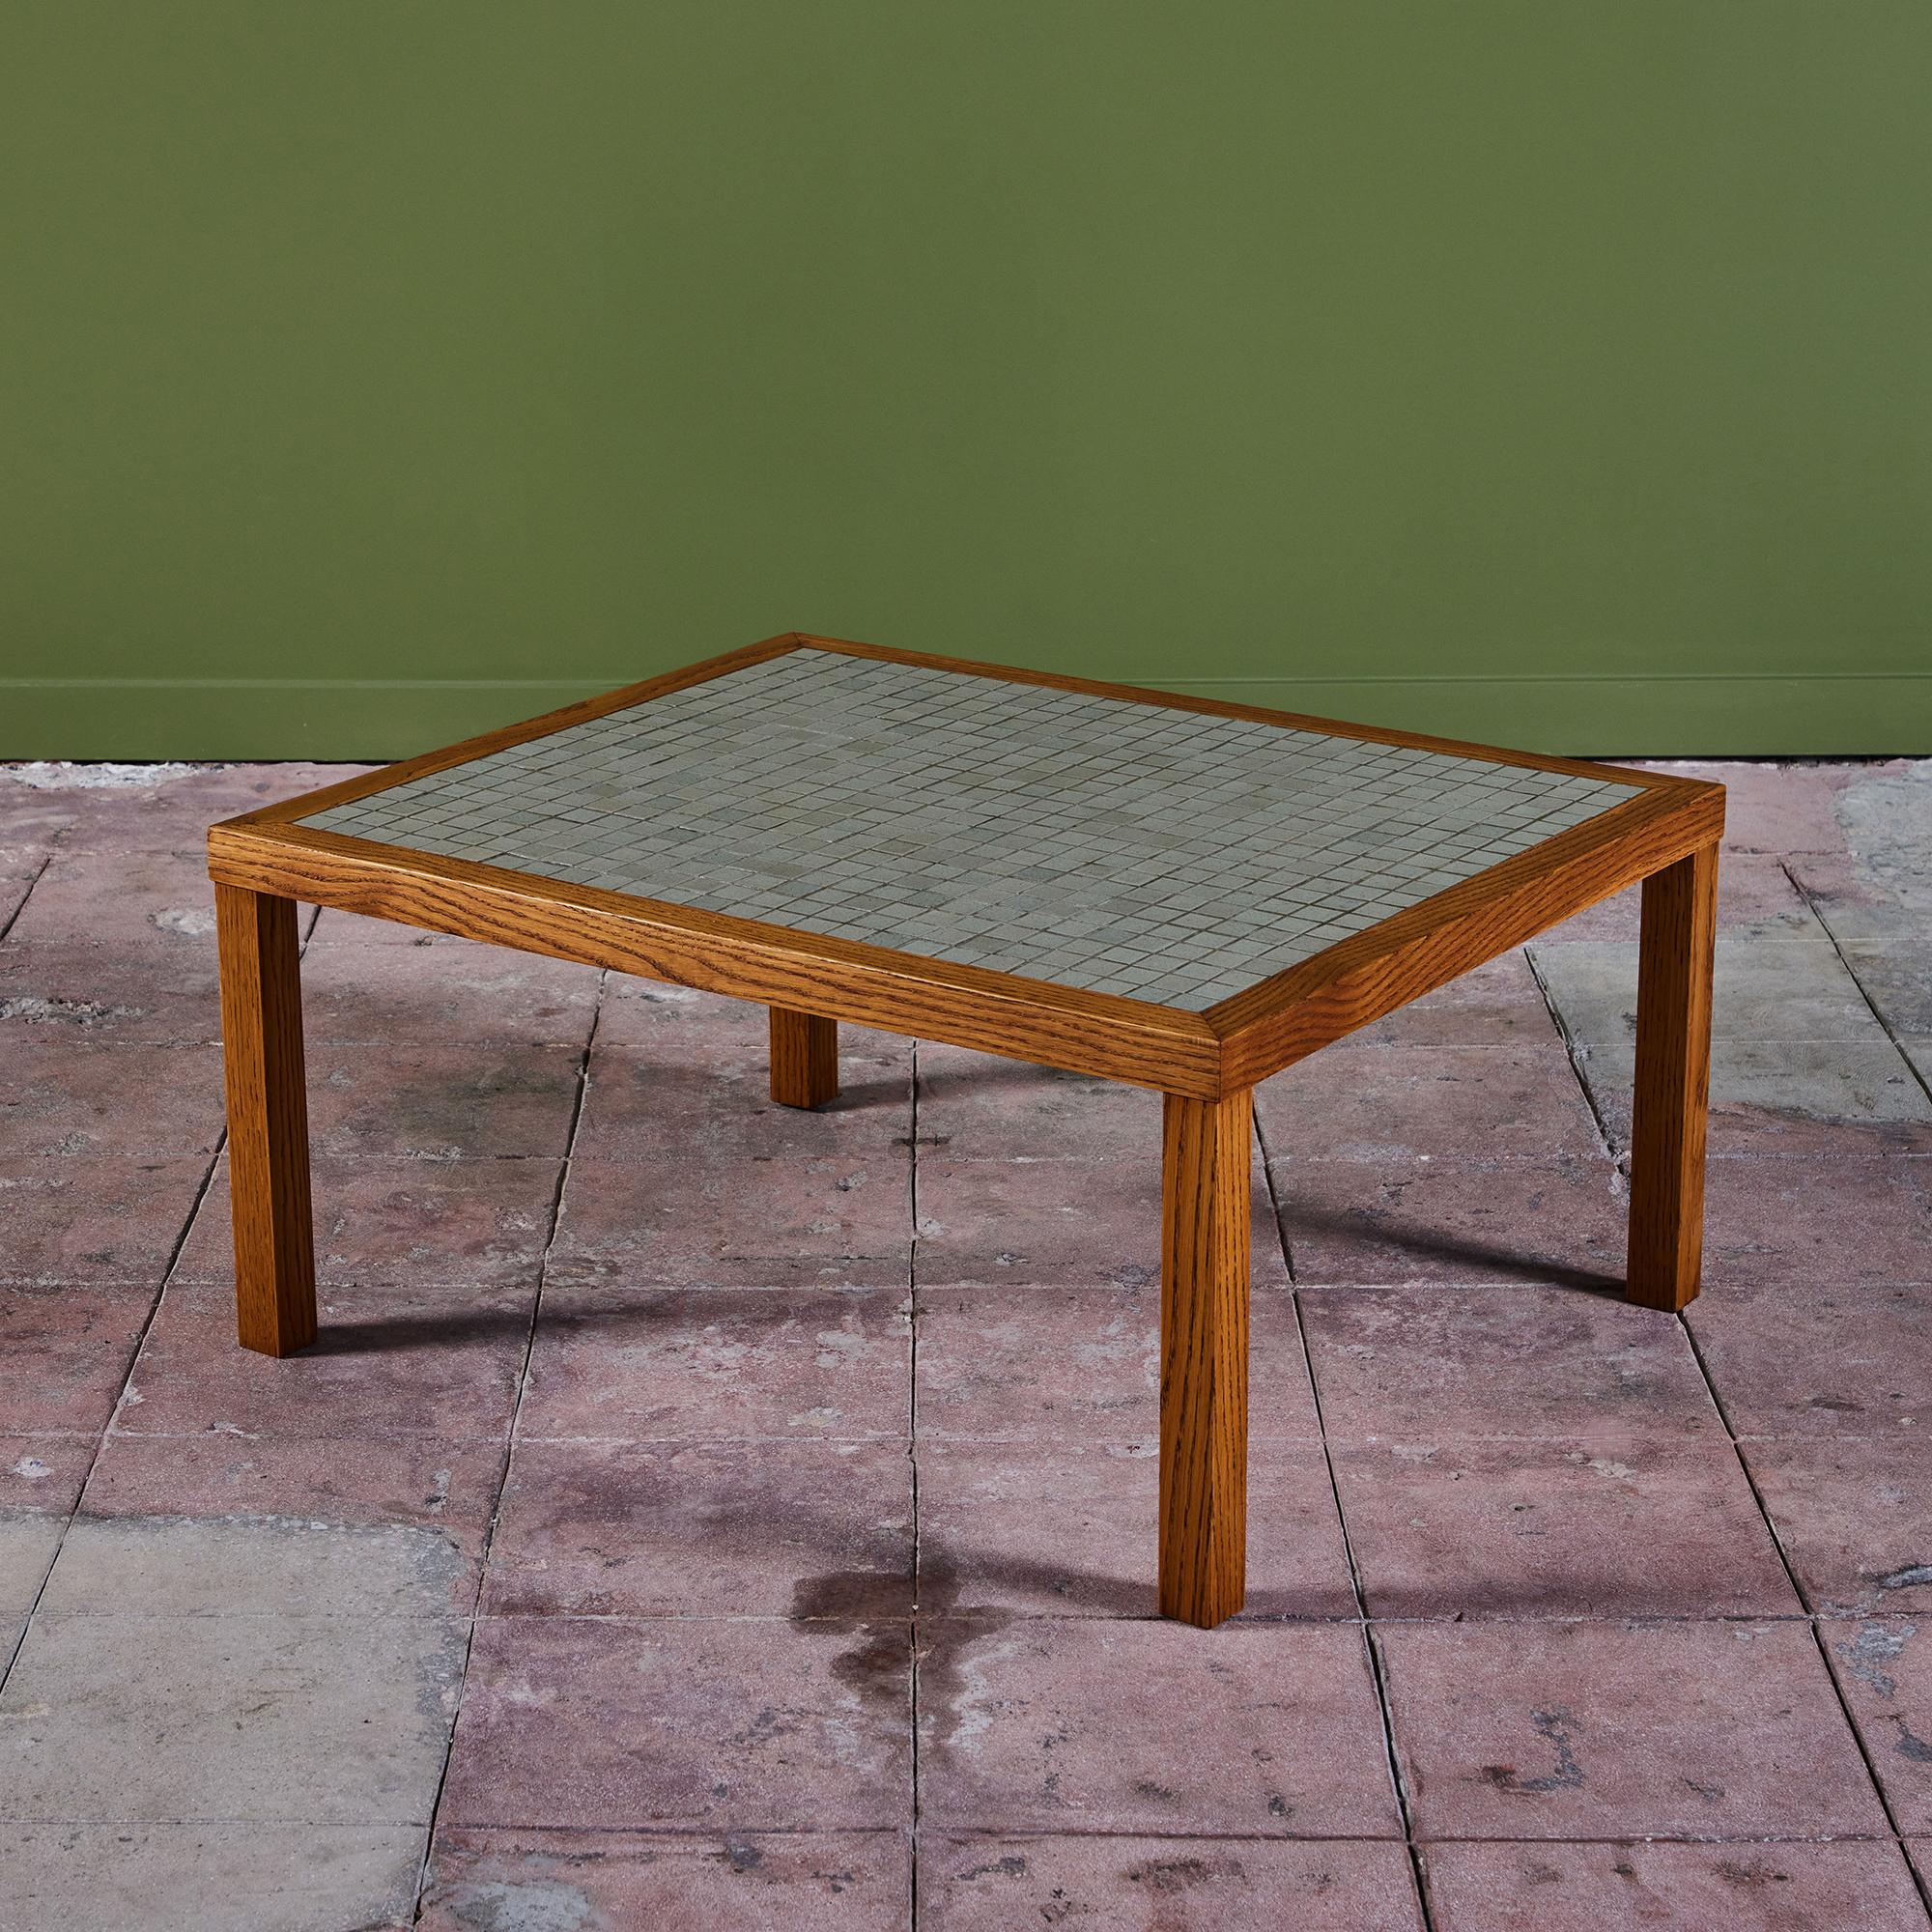 Rectangular coffee table by Gordon & Jane Martz. The table top is inlaid with square ceramic tiles in light speckled gray. The frame of the table and four legs are solid oak.

Dimensions
36